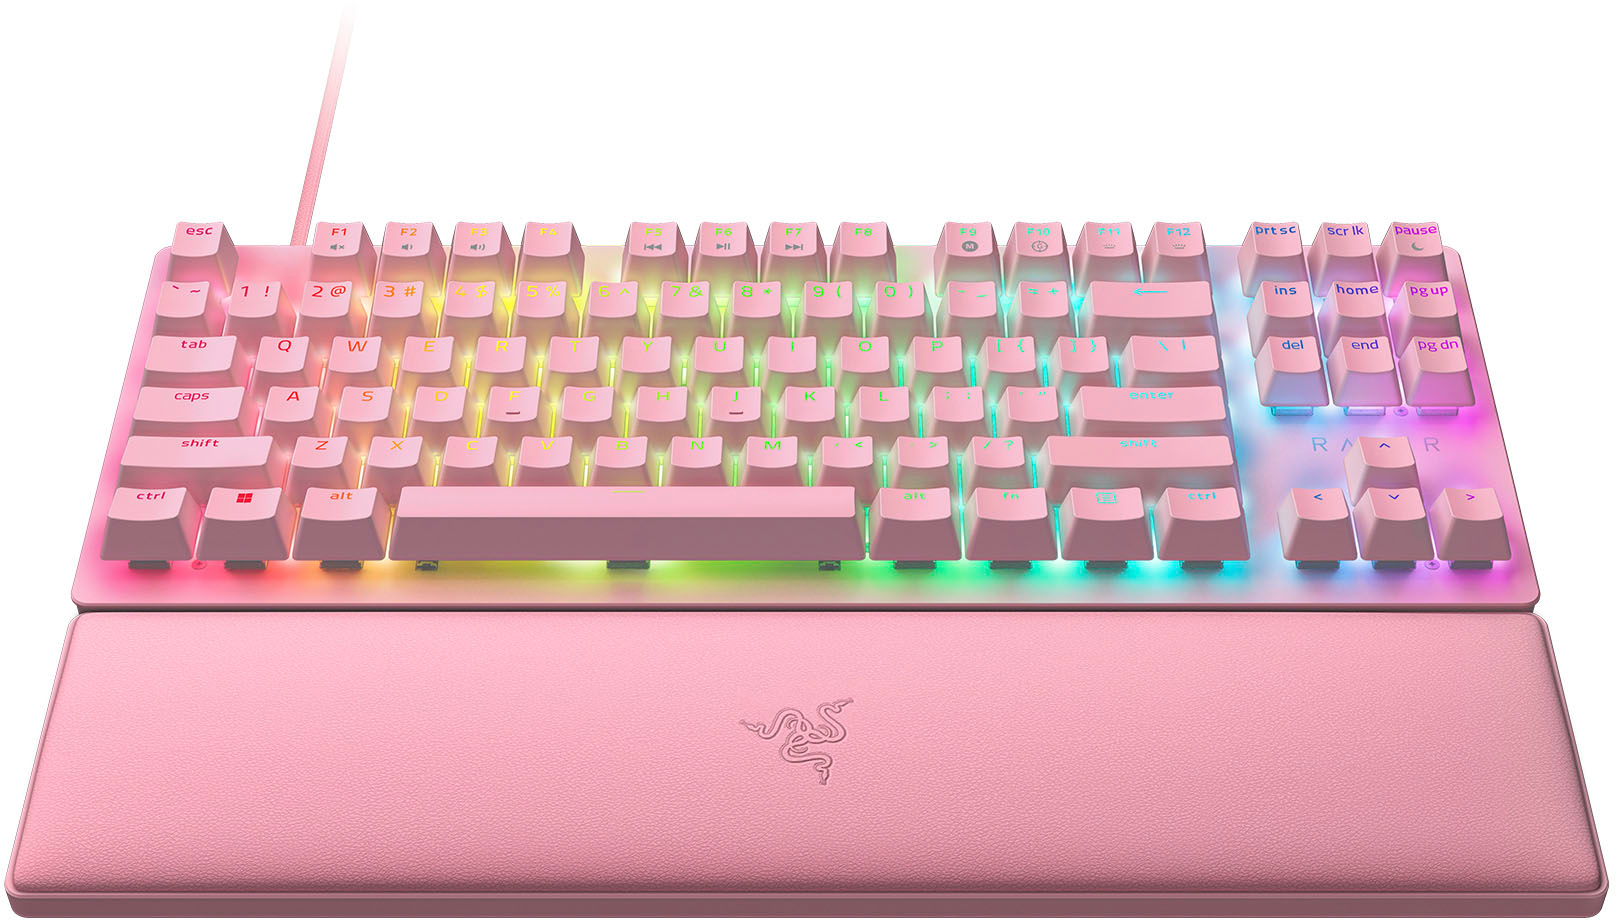 Razer Huntsman V2 TKL Tenkeyless Gaming Keyboard: Fast Linear Optical  Switches Gen2 & 8000Hz Polling Rate - Detachable Type-C Cable - PBT Keycaps  